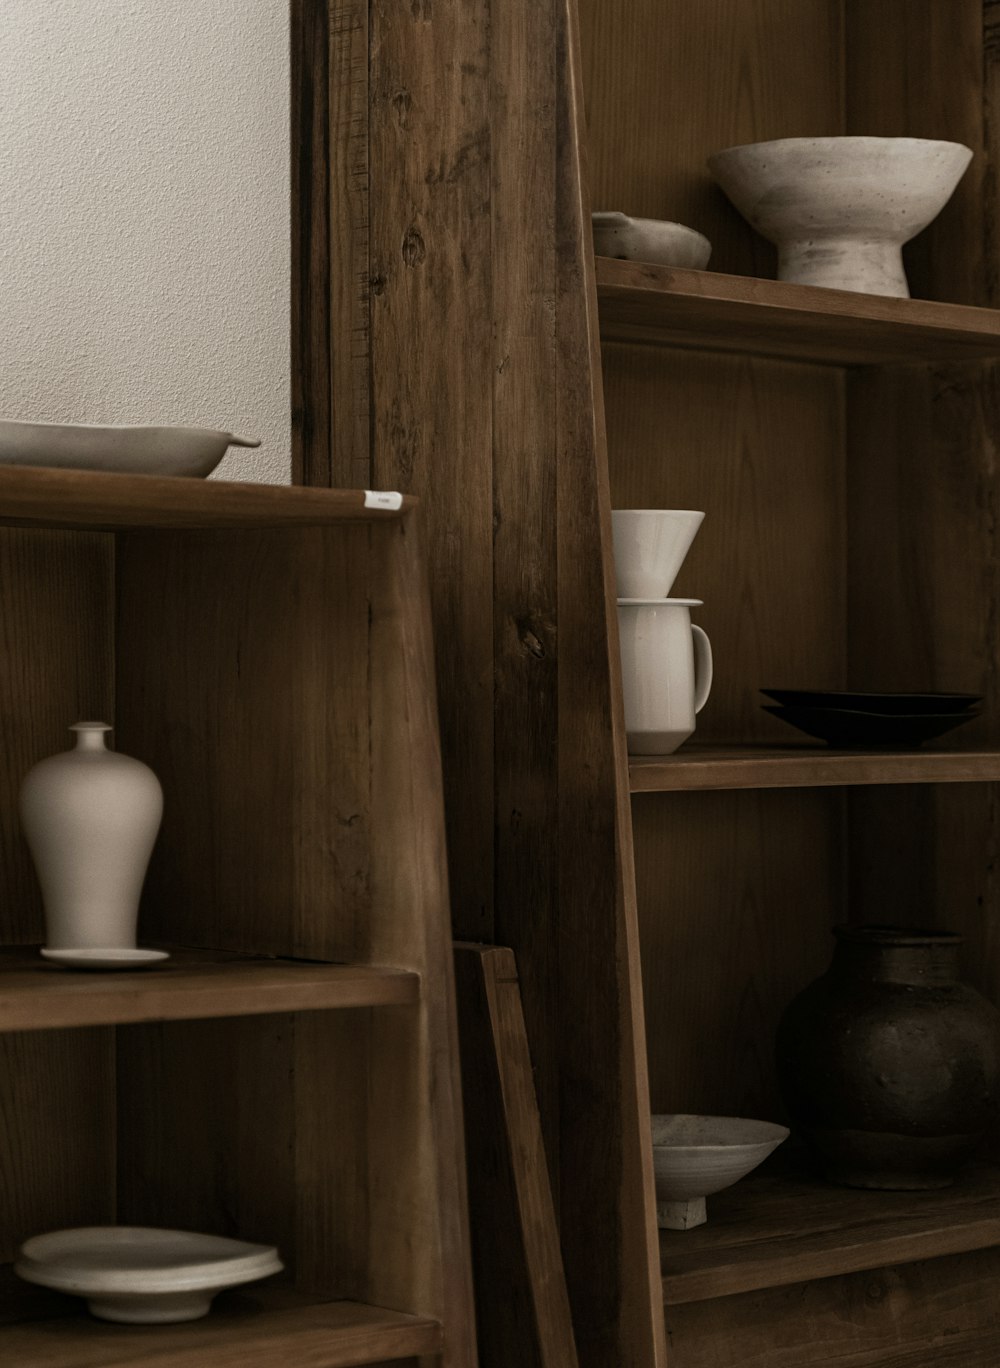 a wooden shelf filled with white dishes and vases